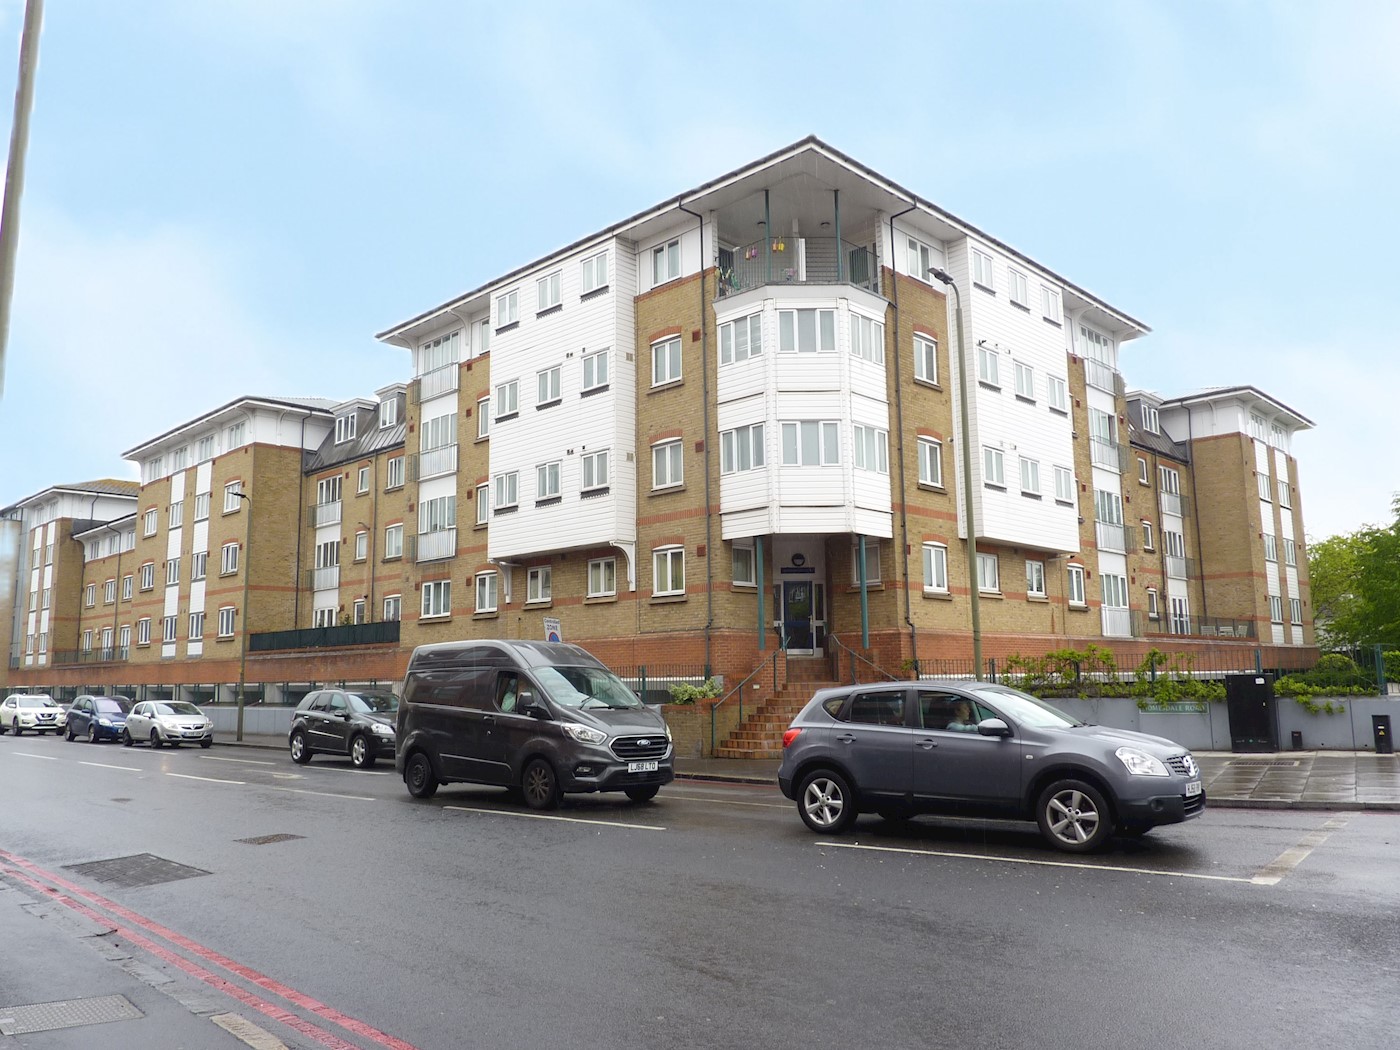 30 Gainsborough Court, Homesdale Road, Bromley, BR2 9NB 1/7